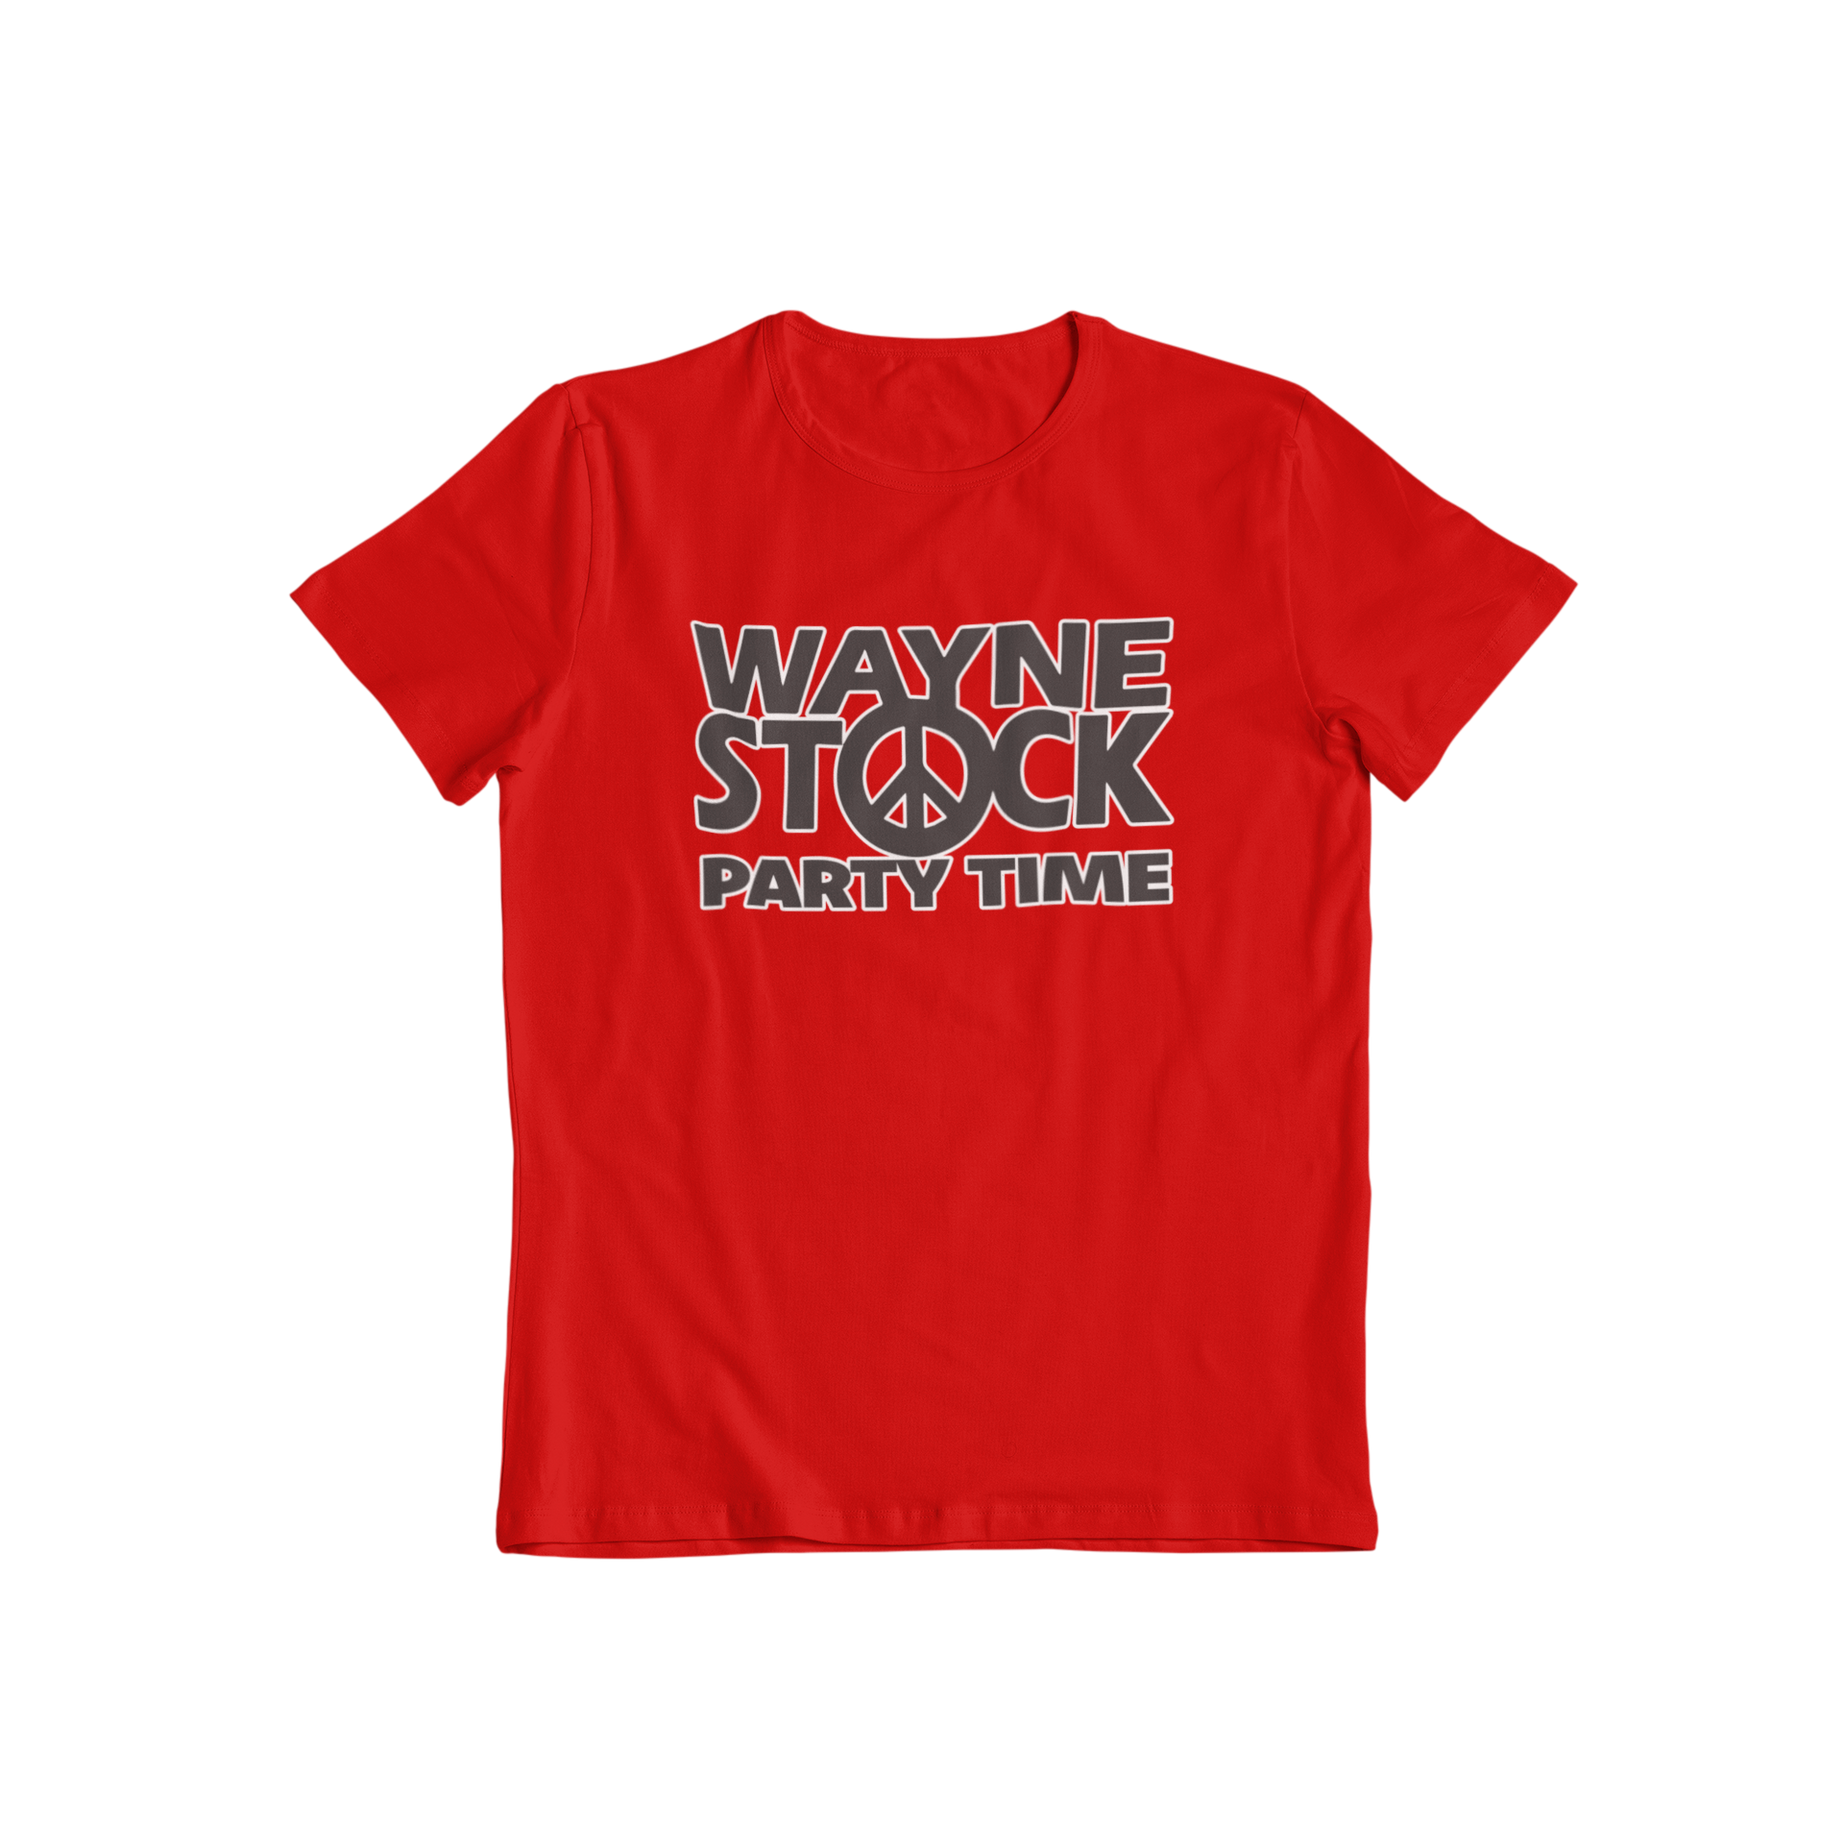 Get ready to party on with the Wayne Stock T-shirt! Inspired by the cult classic film Wayne's World, this classic tee is perfect for any fan. Rock this t-shirt and show off your love for the movie in a fun and quirky way. Party time, excellent!